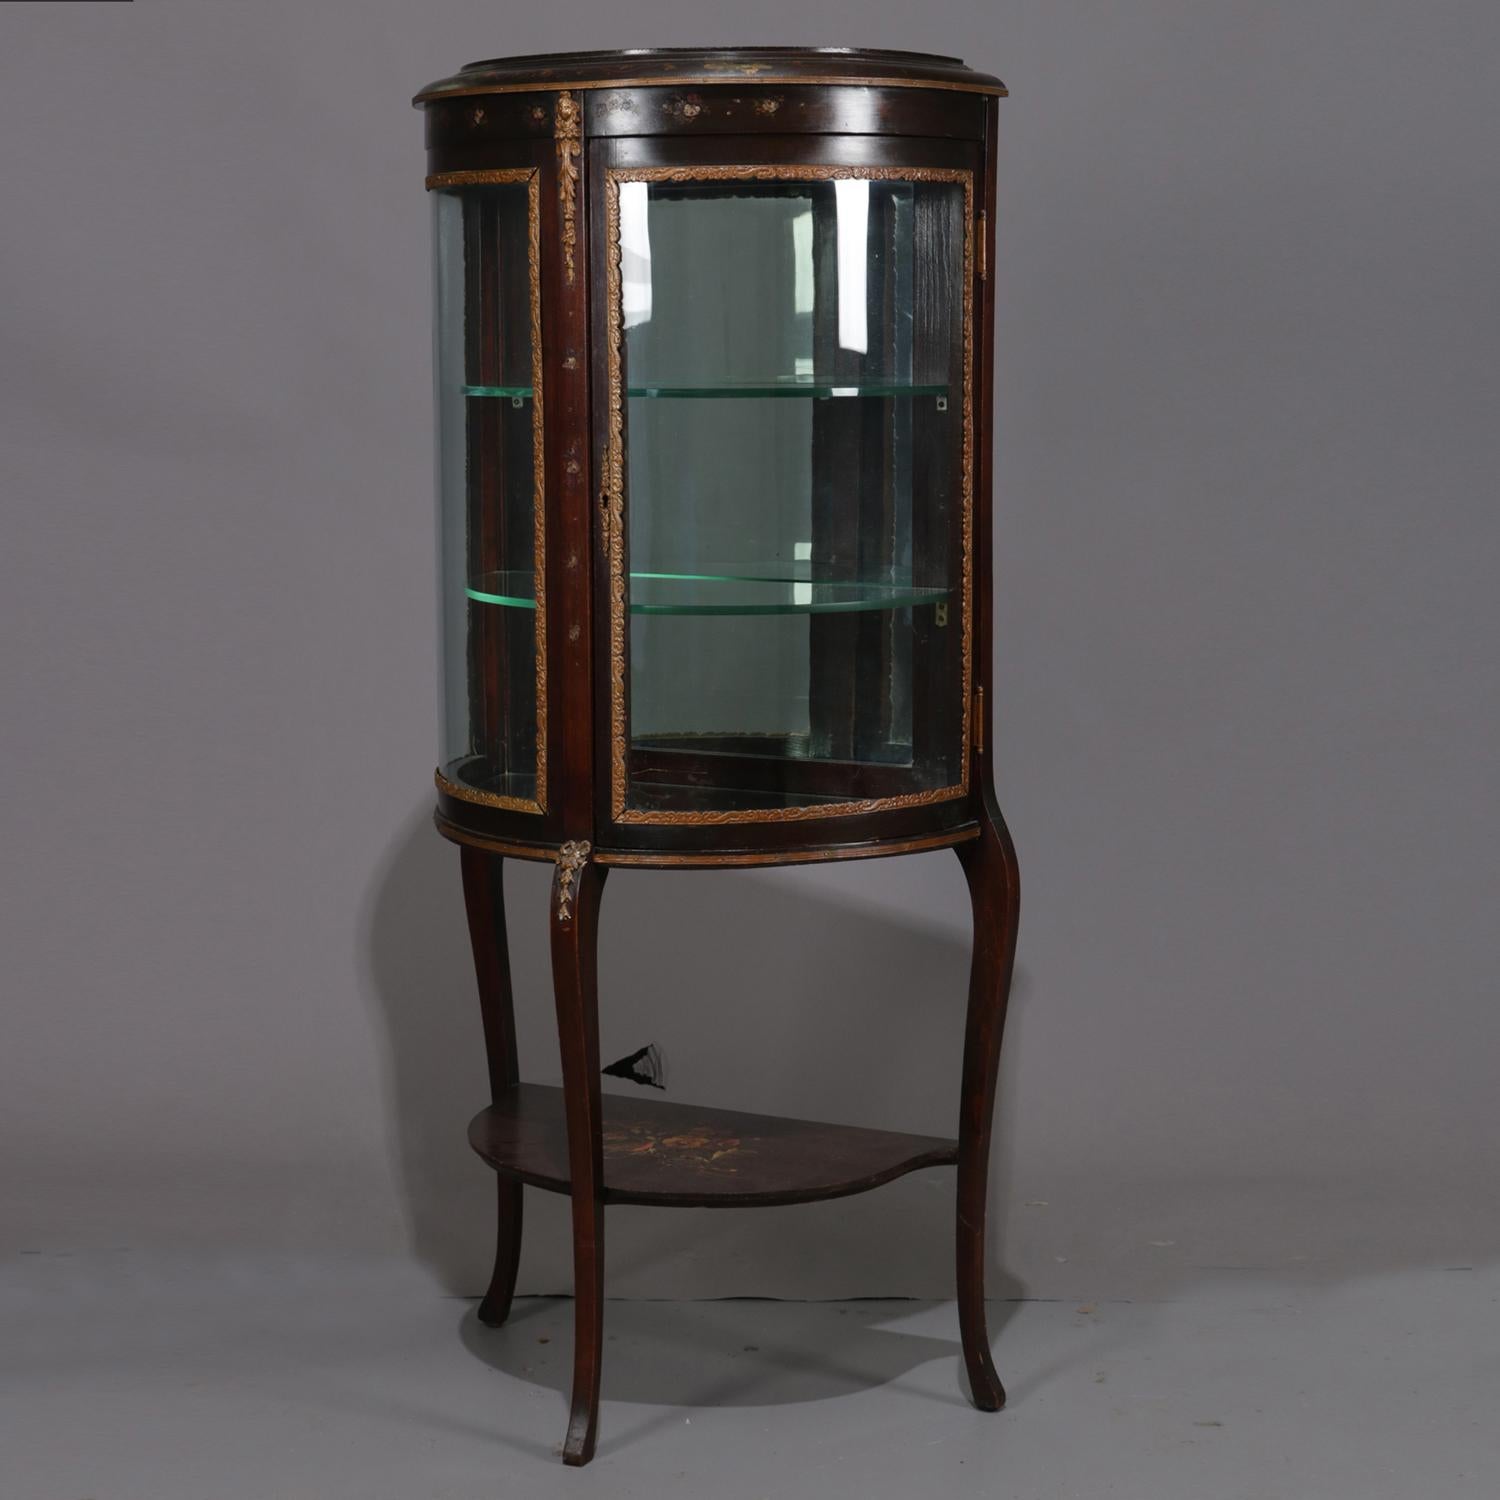 Antique French Louis XVI mahogany vitrine features Demilune form with bent glass and single door opening to mirrored interior with glass shelving, seated on cabriole legs, ormolu mounts and hand painted decoration throughout, circa